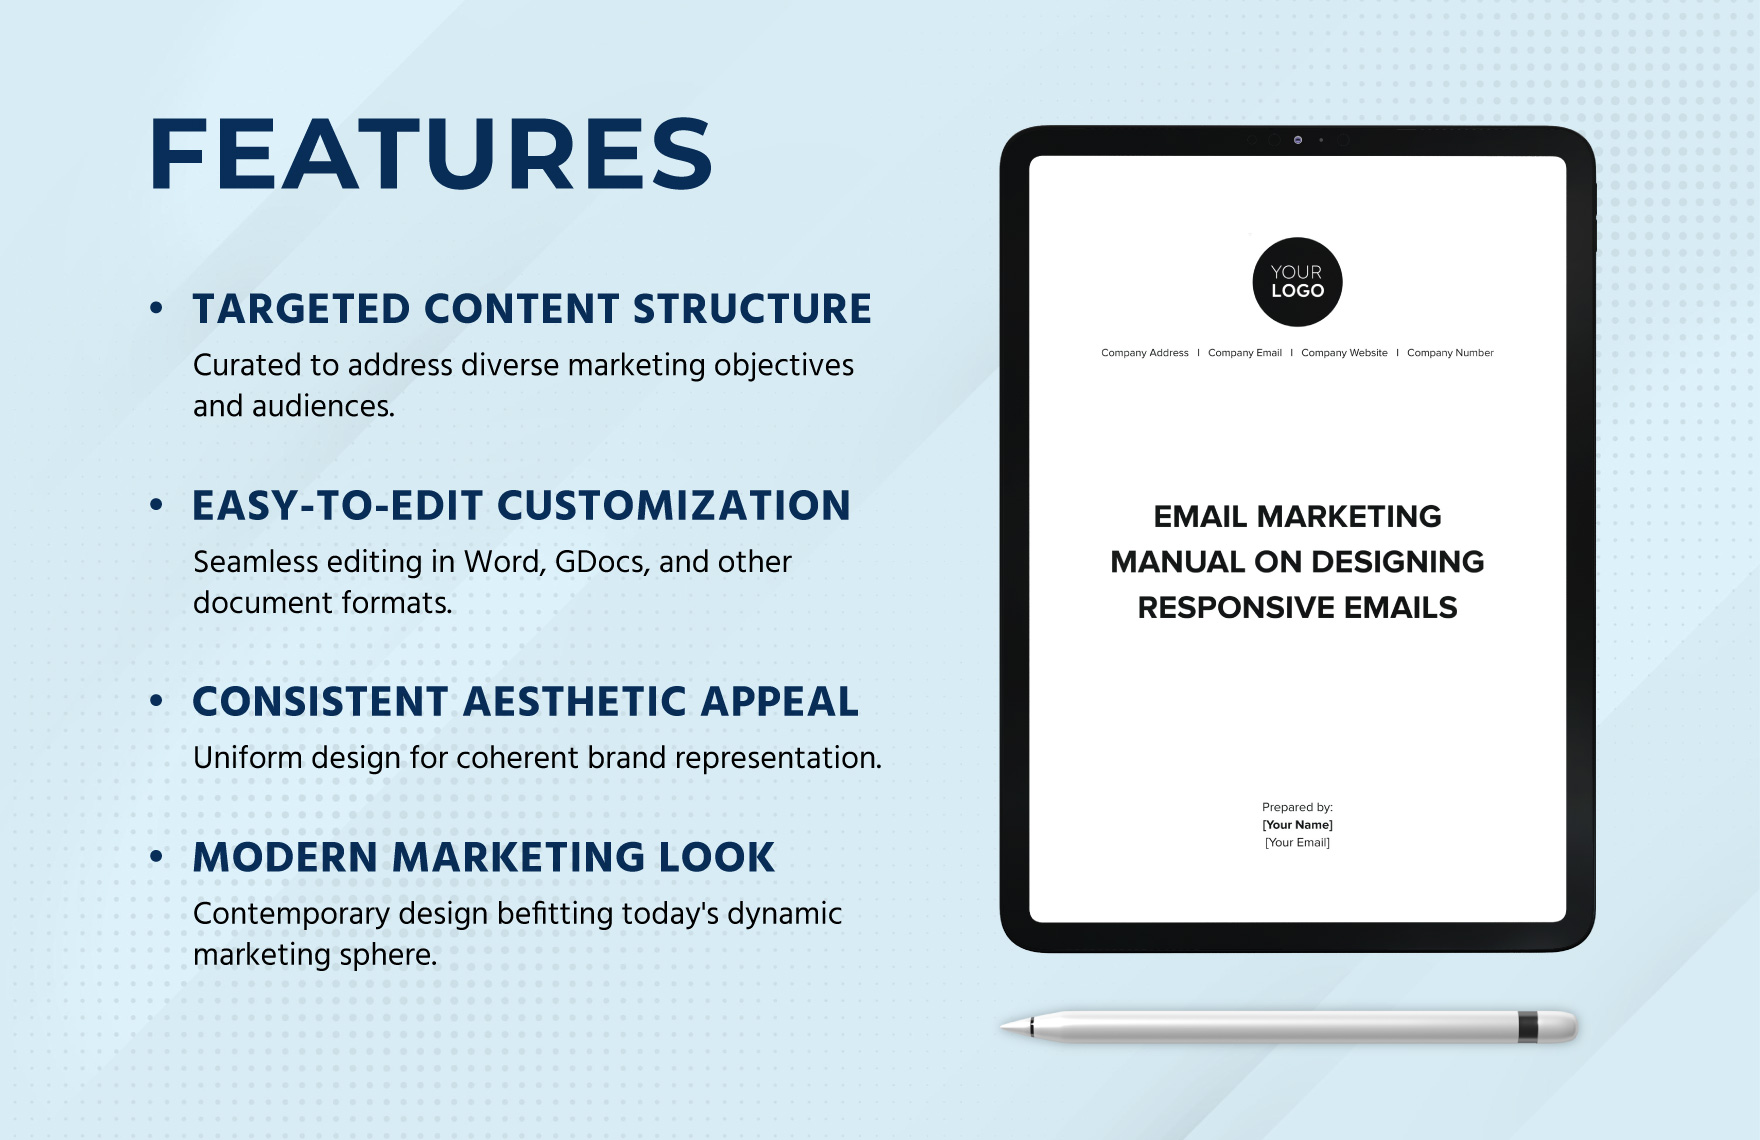 Email Marketing Manual on Designing Responsive Emails Template